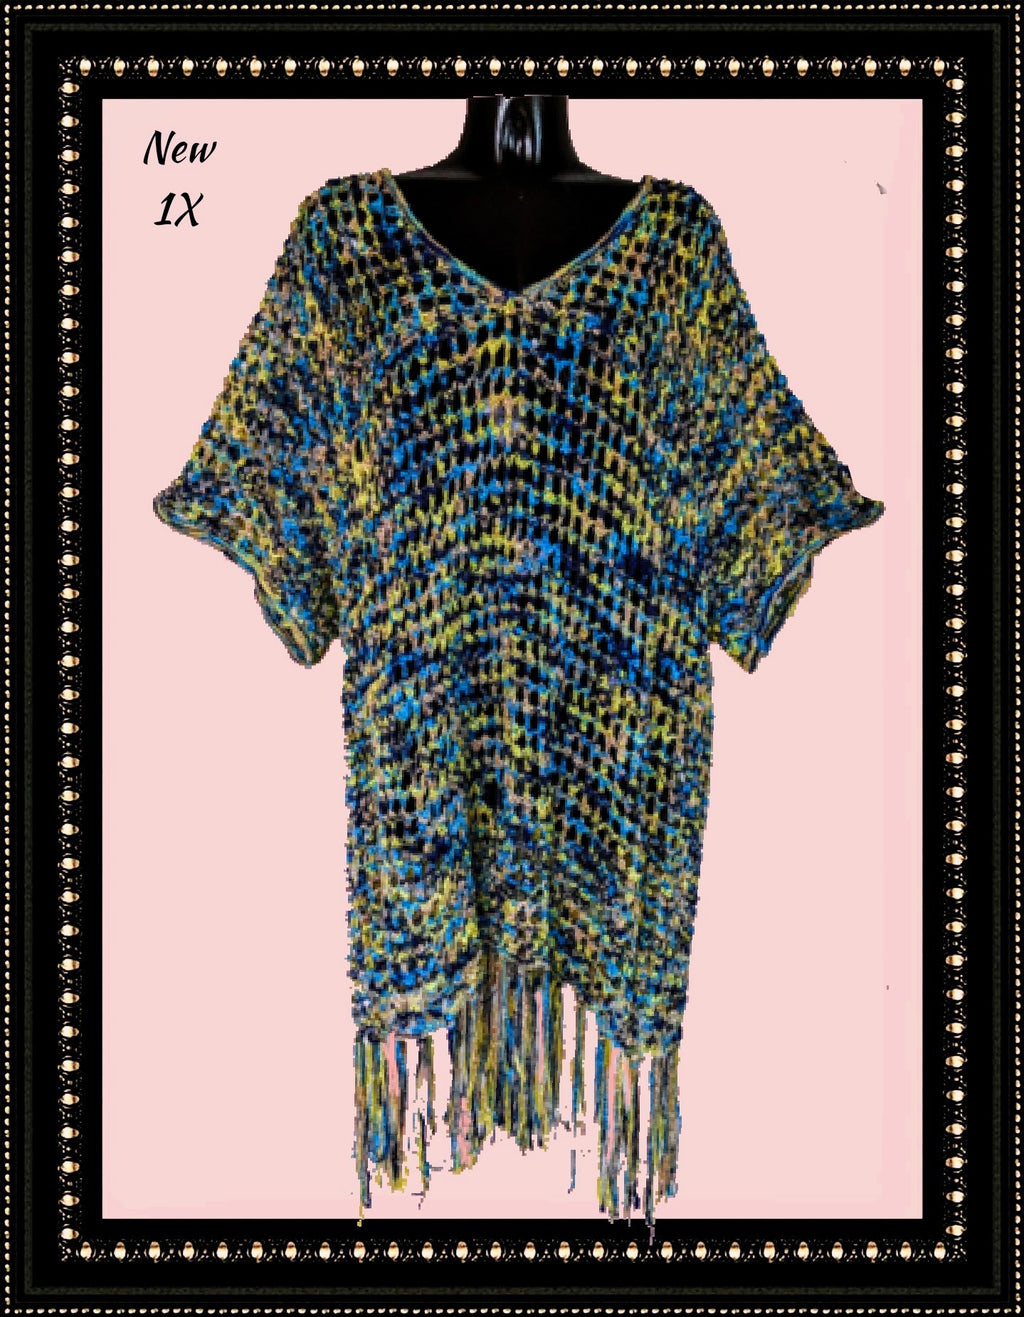 A Miles fringed knit wrap - beautiful! (p*)